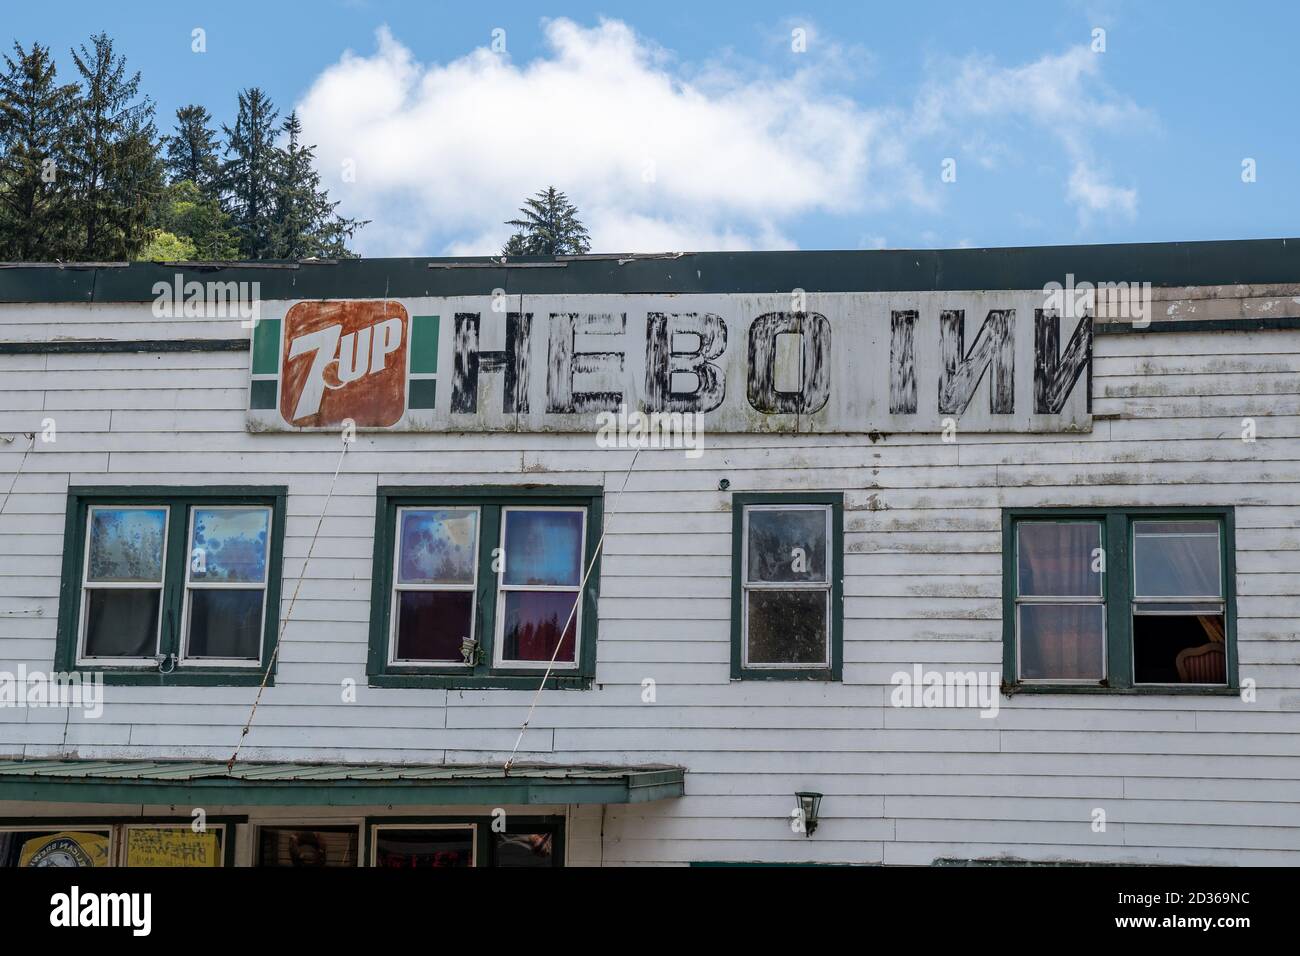 Hebo, Oregon - August 1, 2020: Old, rustic classic cafe - the Hebo Inn, is a restaurant. Old fashioned 7Up Logo on the sign Stock Photo